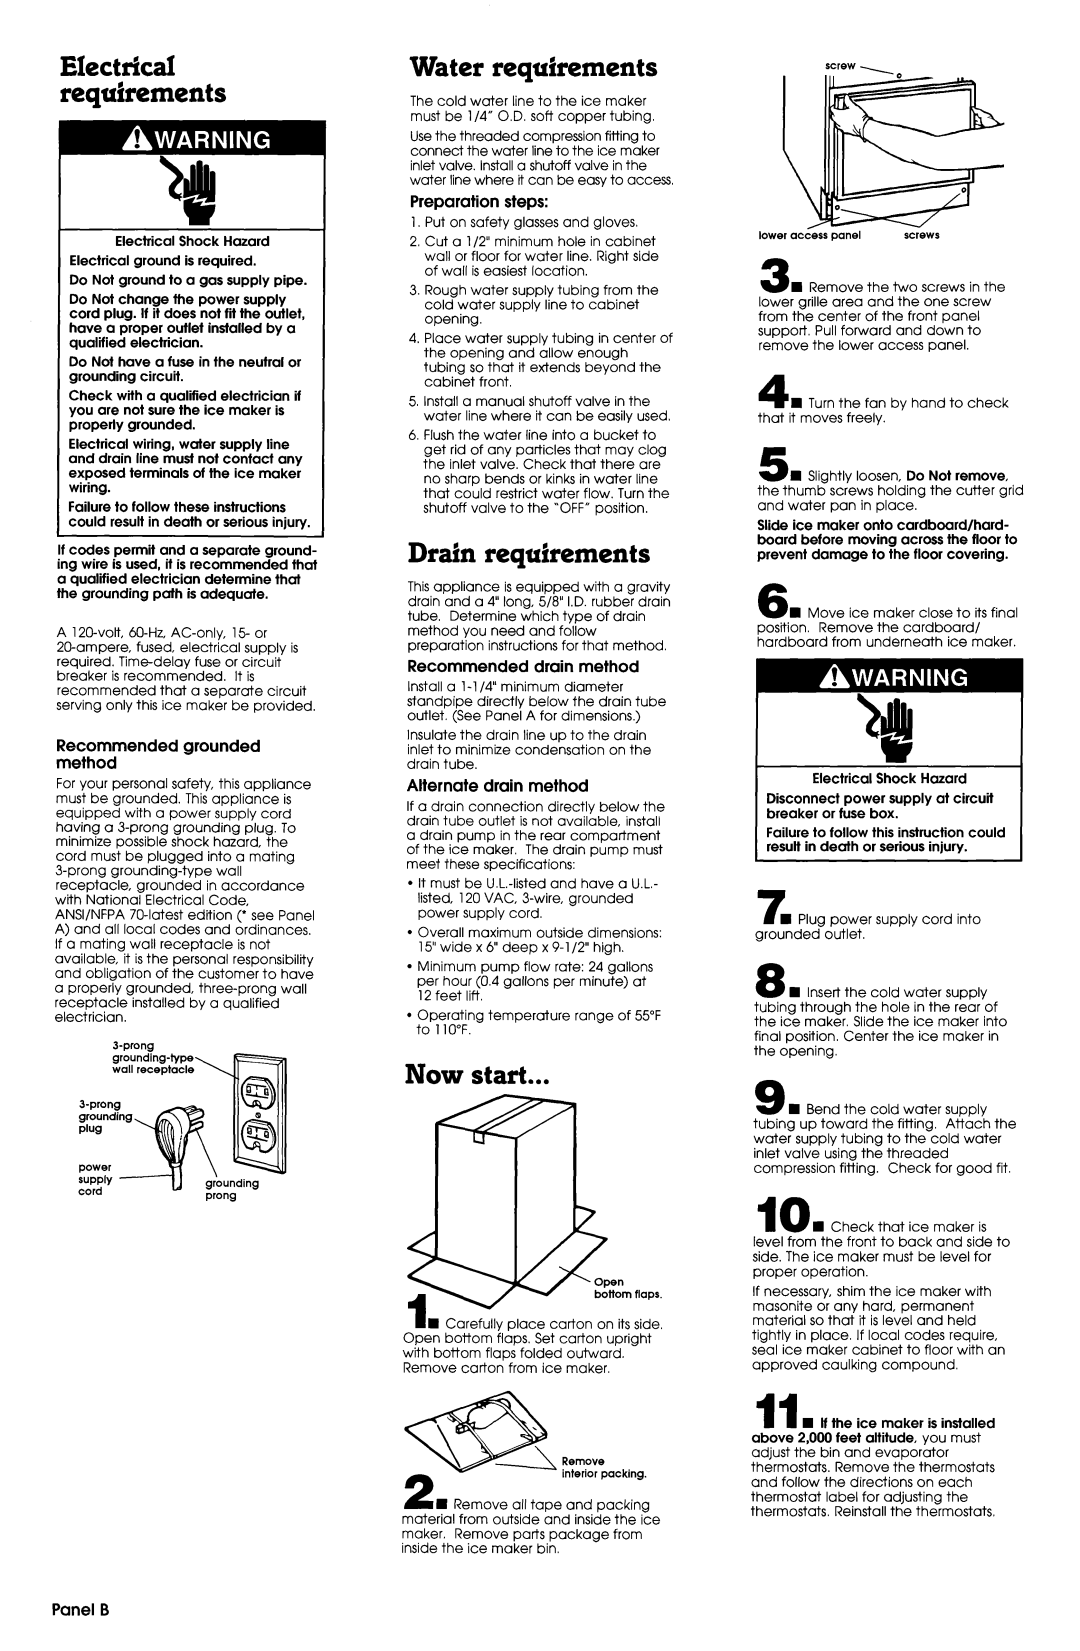 Whirlpool 2180911 installation instructions Water requirements, Drain requirements, Now start, Electrical requirements 